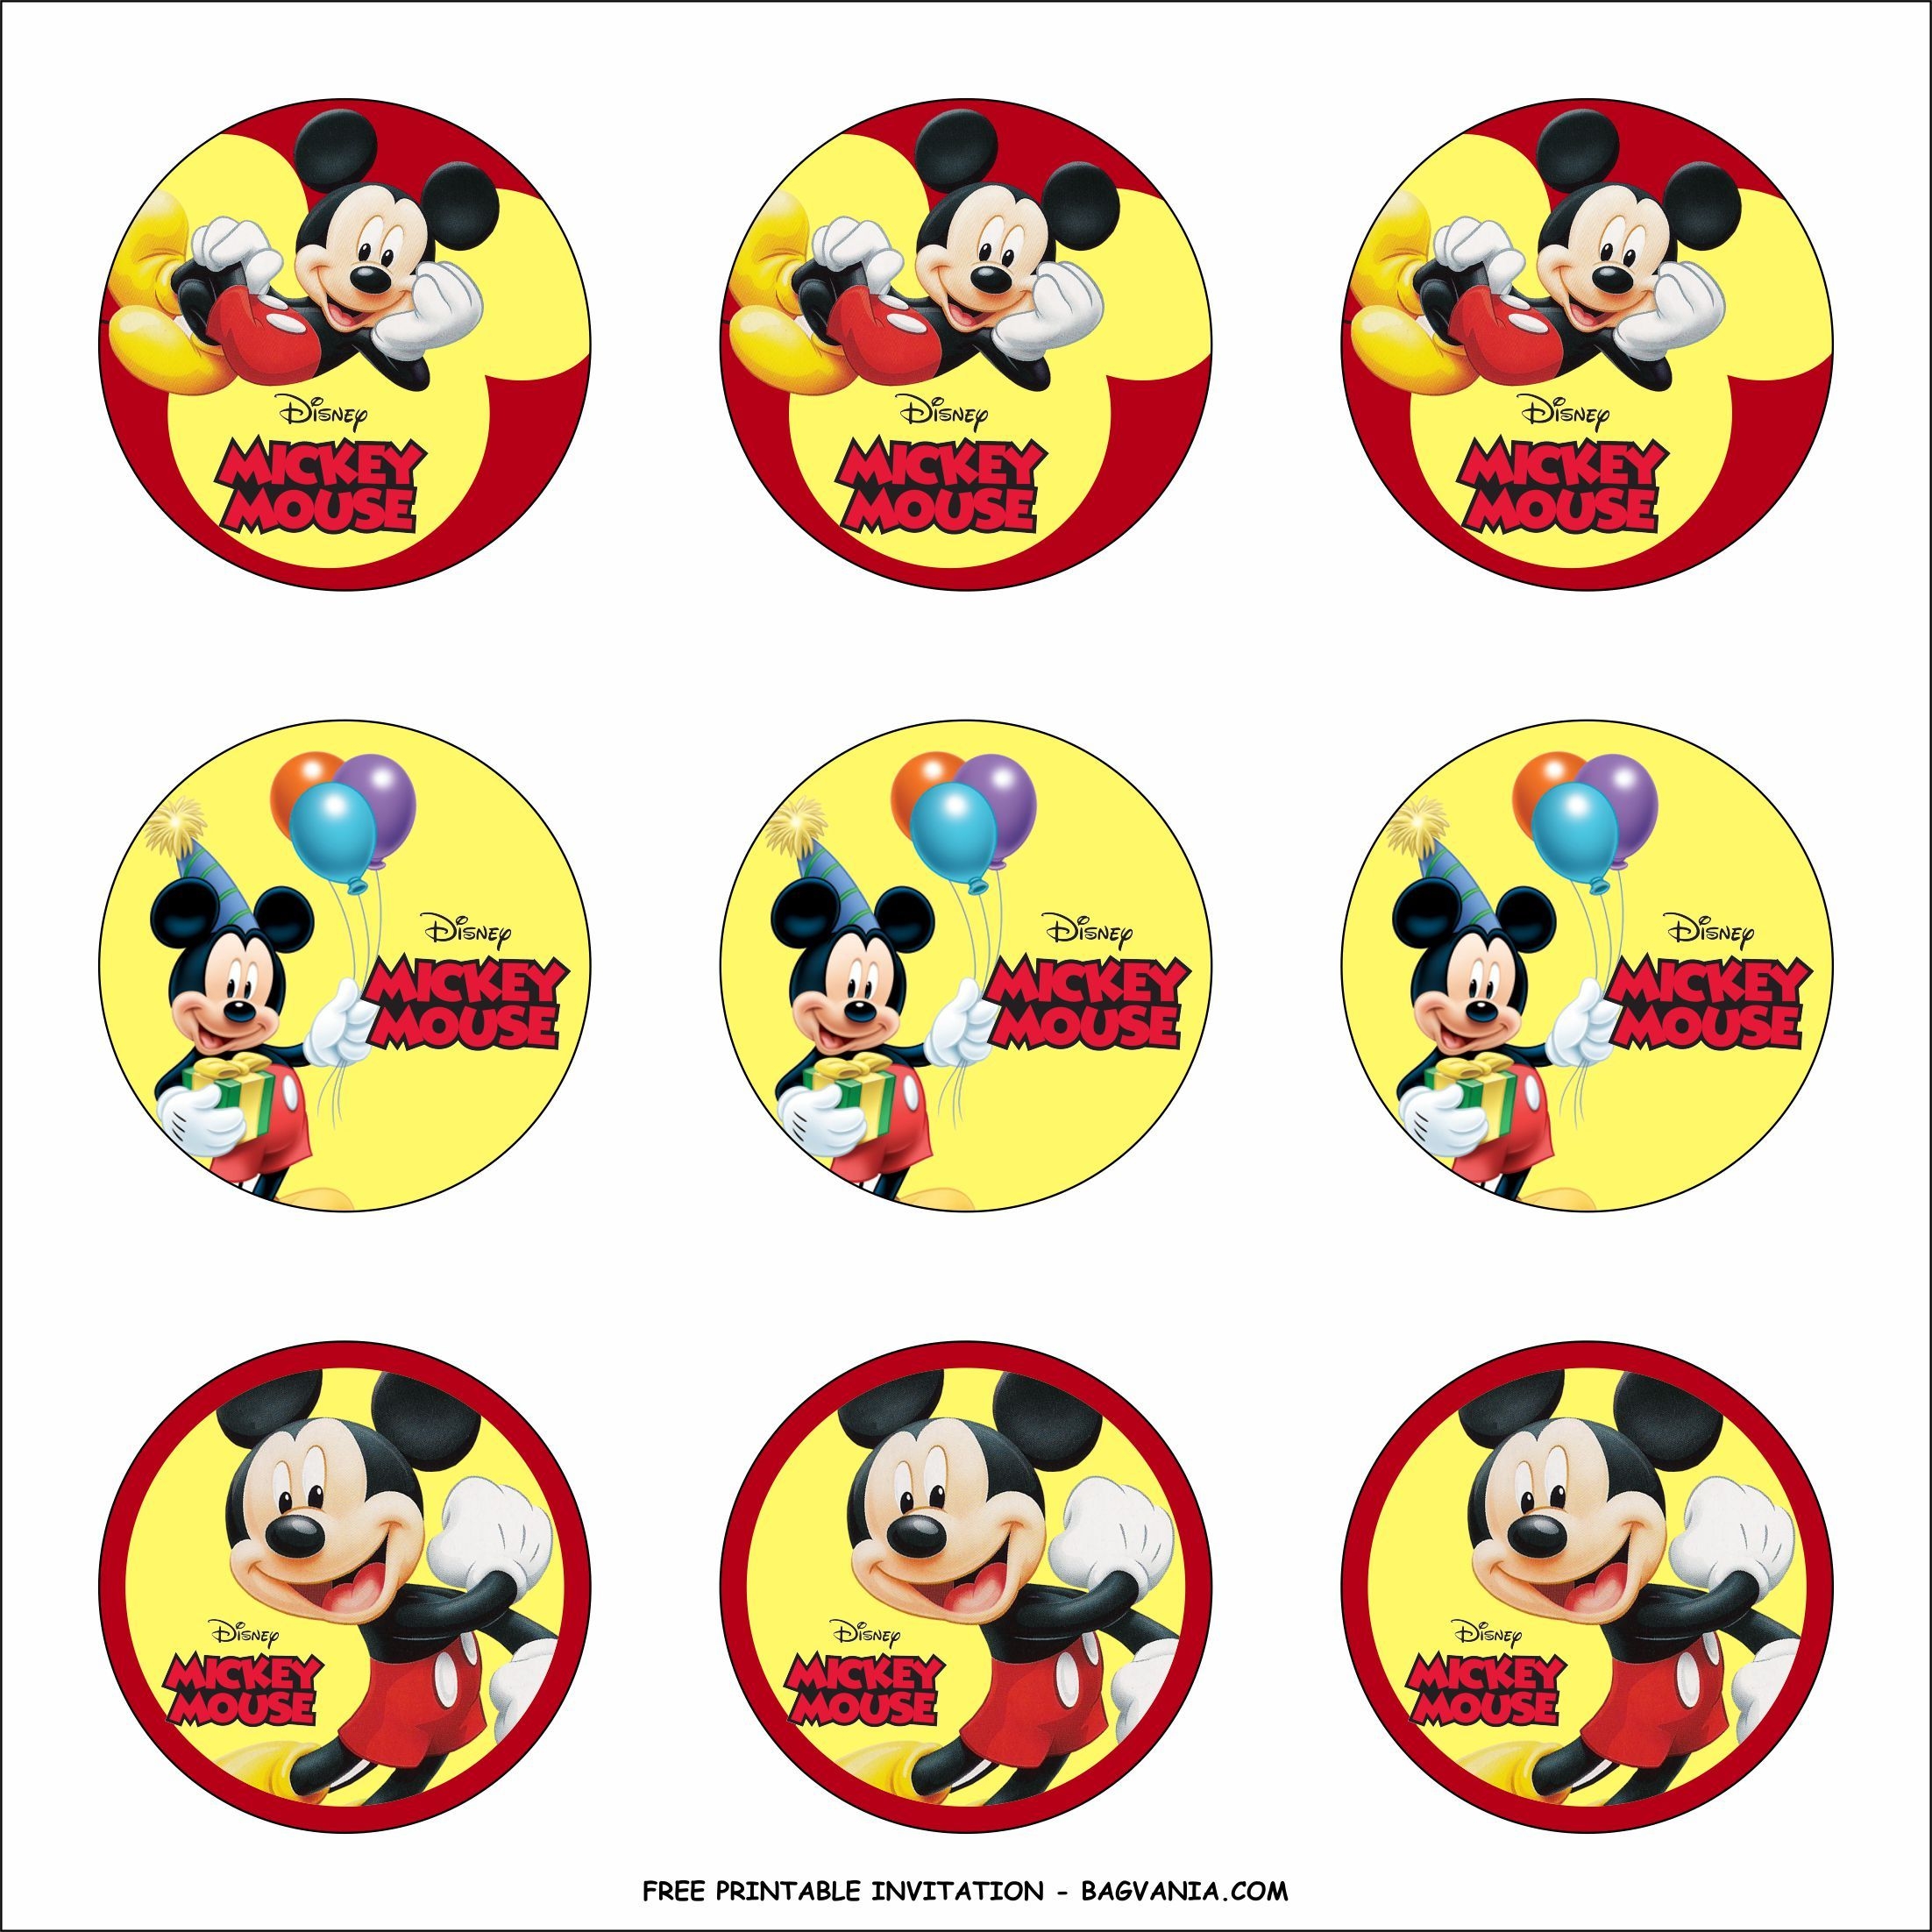 Free Printable Mickey Mouse Birthday Party Kits Template Mickey Mouse Birthday Mickey Mouse Birthday Party Birthday Party Kits